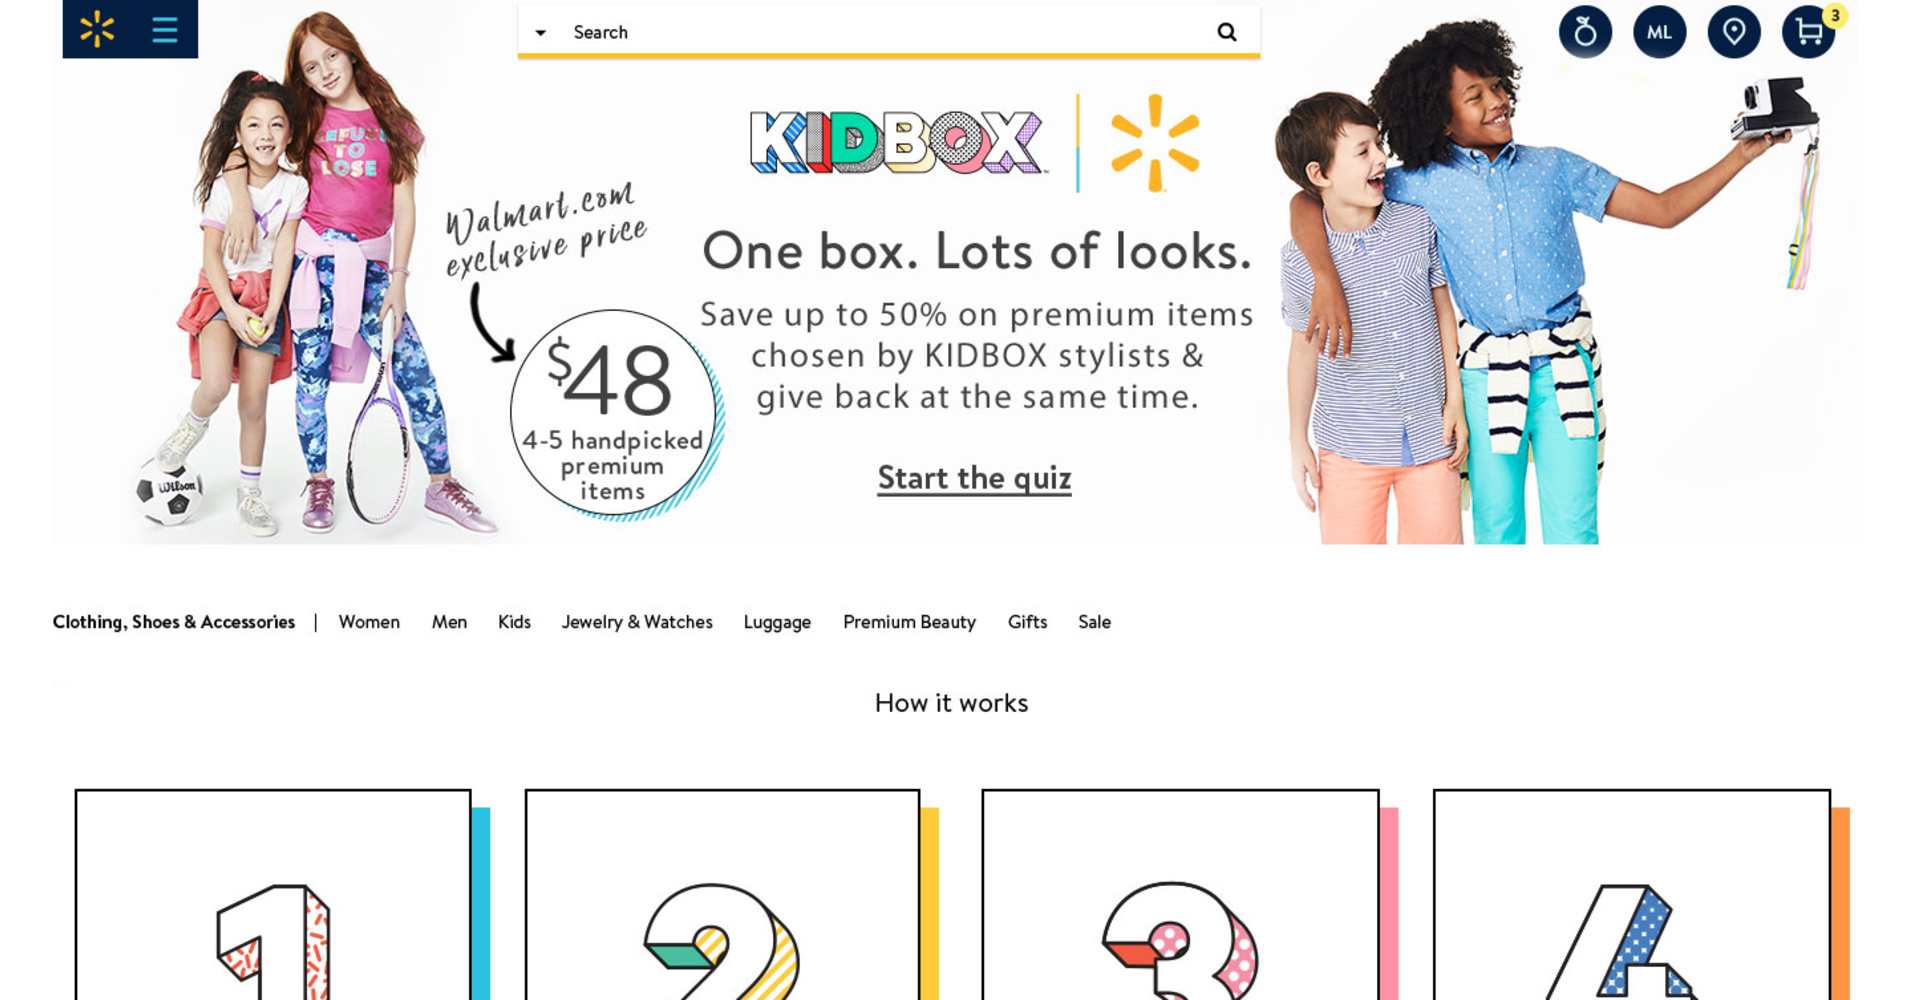 Walmart launches its first subscription box for apparel with Kidbox